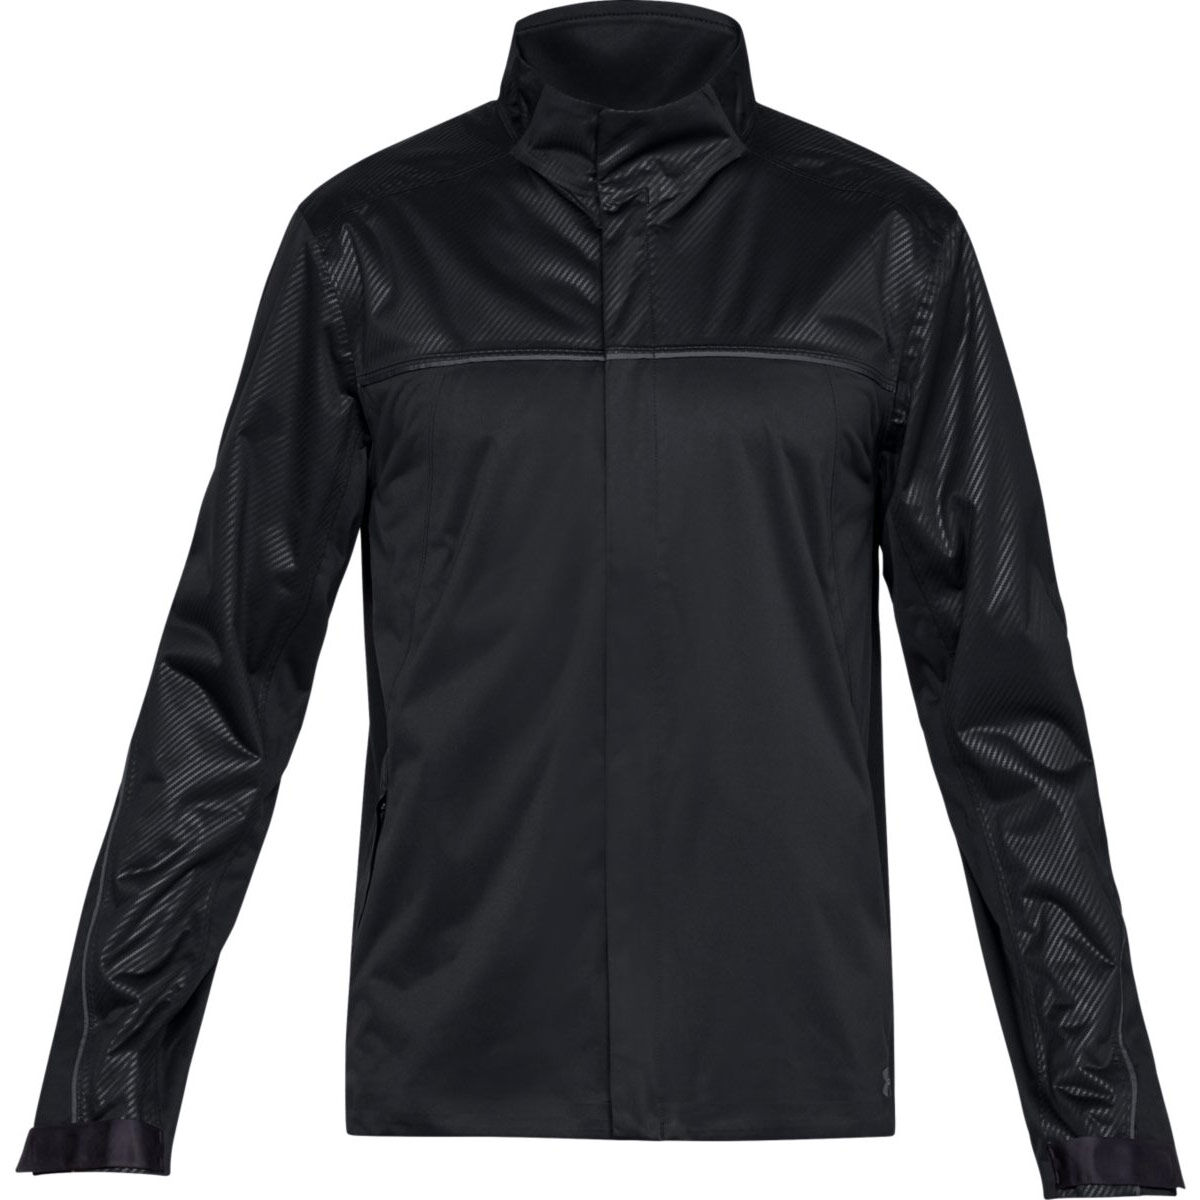 Under Armour Storm 2.0 Rain Jacket from 